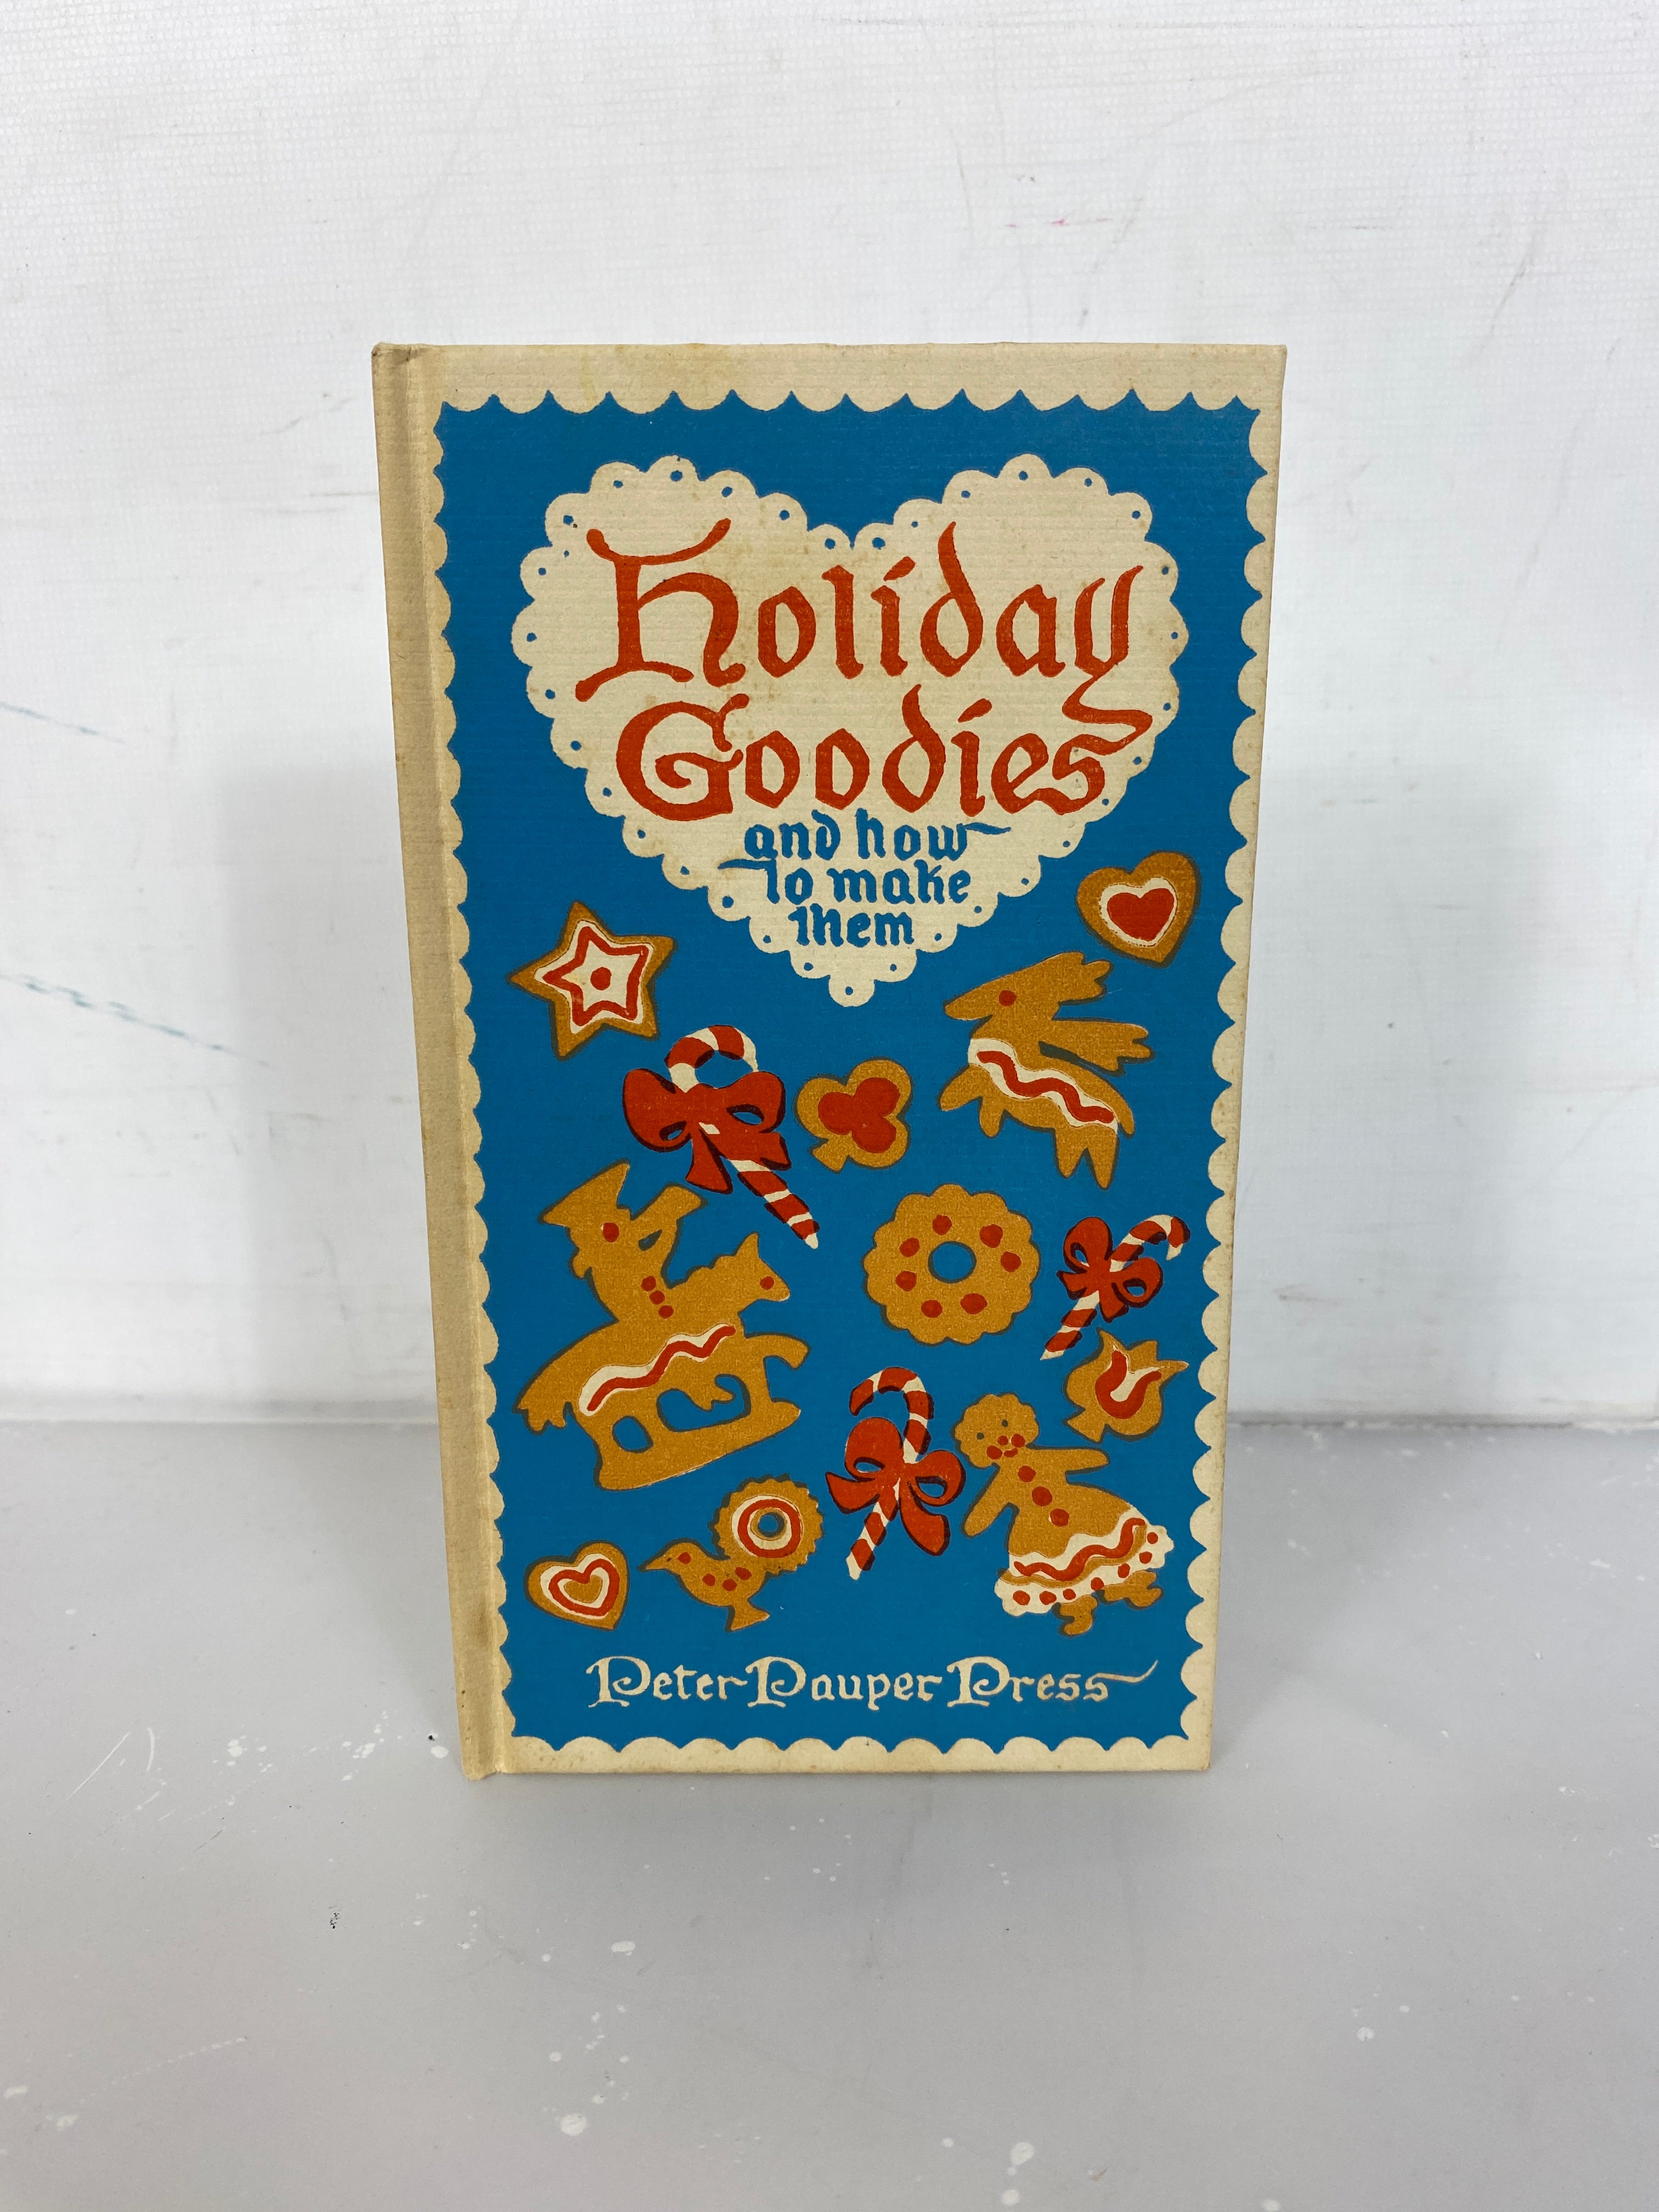 Vintage Holiday Cookbook: Holiday Goodies and How to Make Them 1952 Peter Pauper Press HC in Slipcase